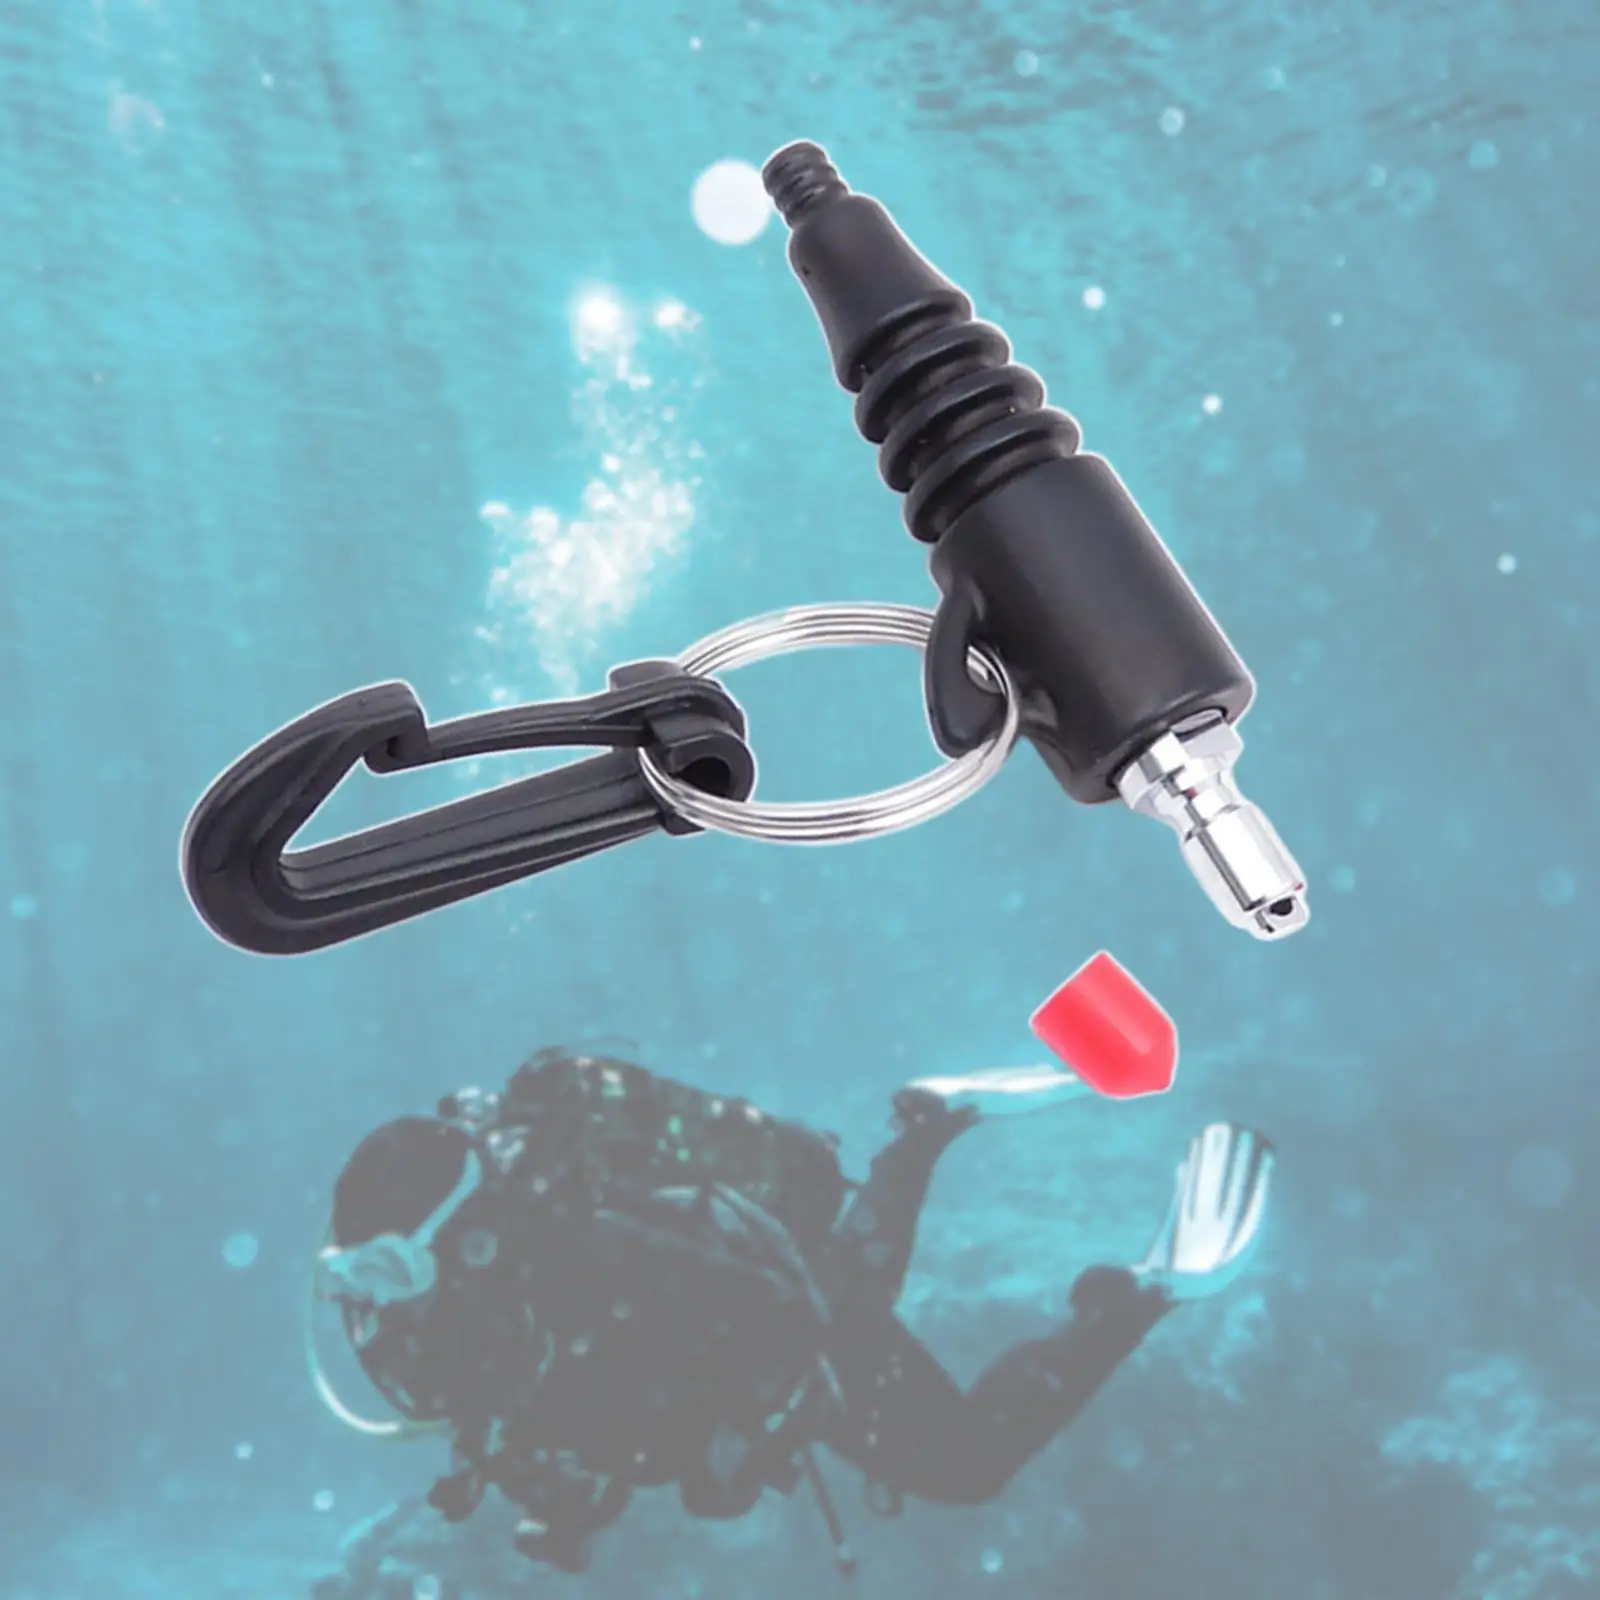 Scuba Diving Mini Inflation Air Nozzle Blow for Standard BC BCD Inflator Hose Diver Snorkeling Diving Photographic Clean Tool